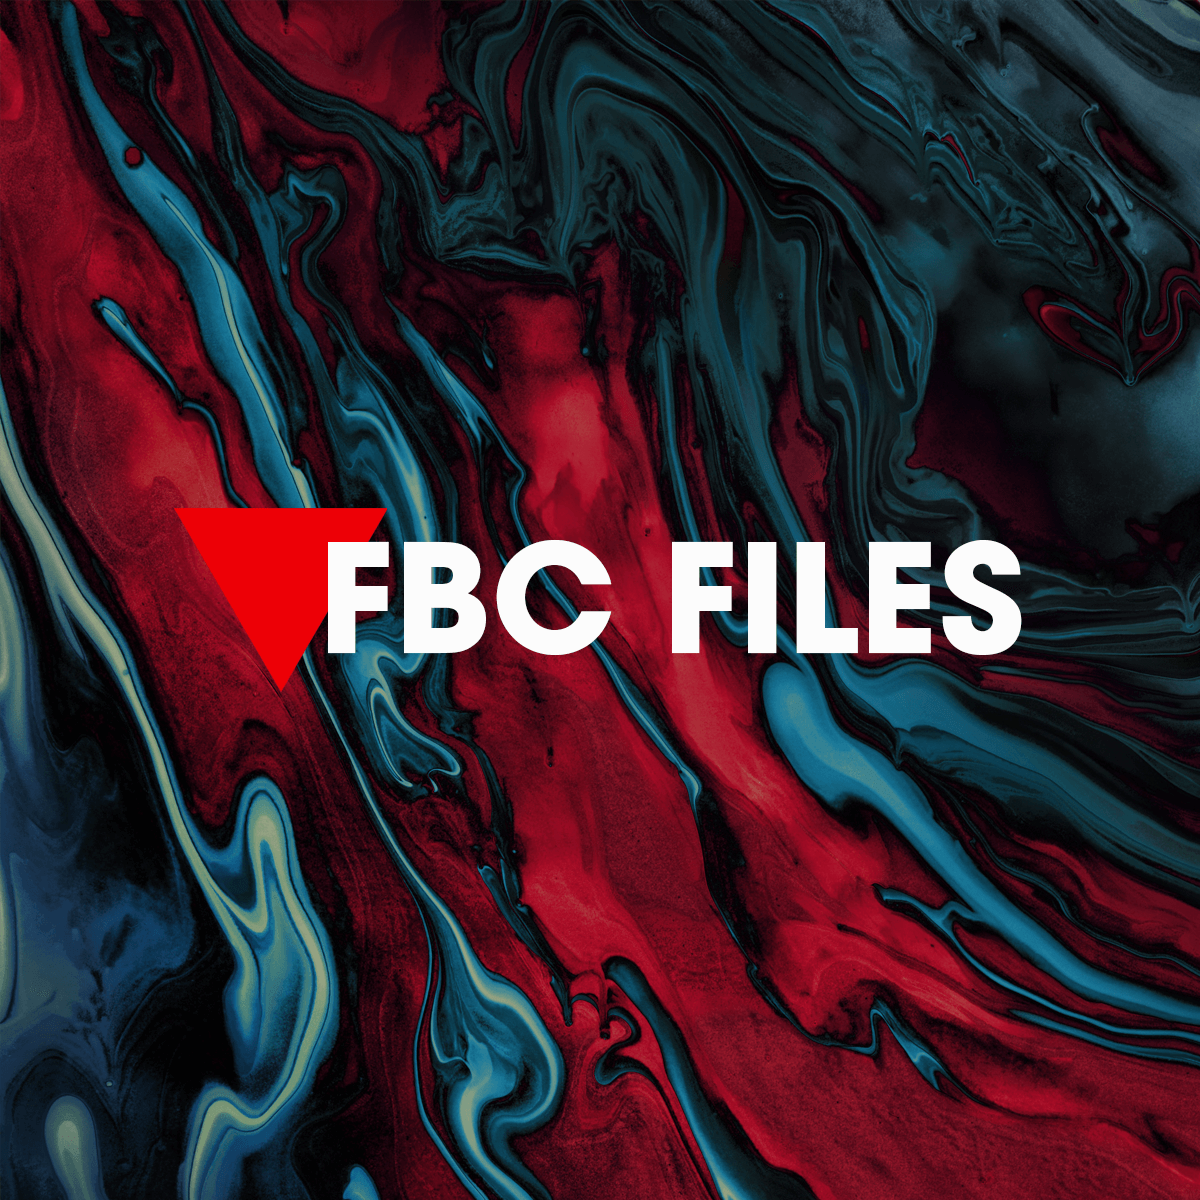 Abstract, trippy background with the FBC Files logo over the top